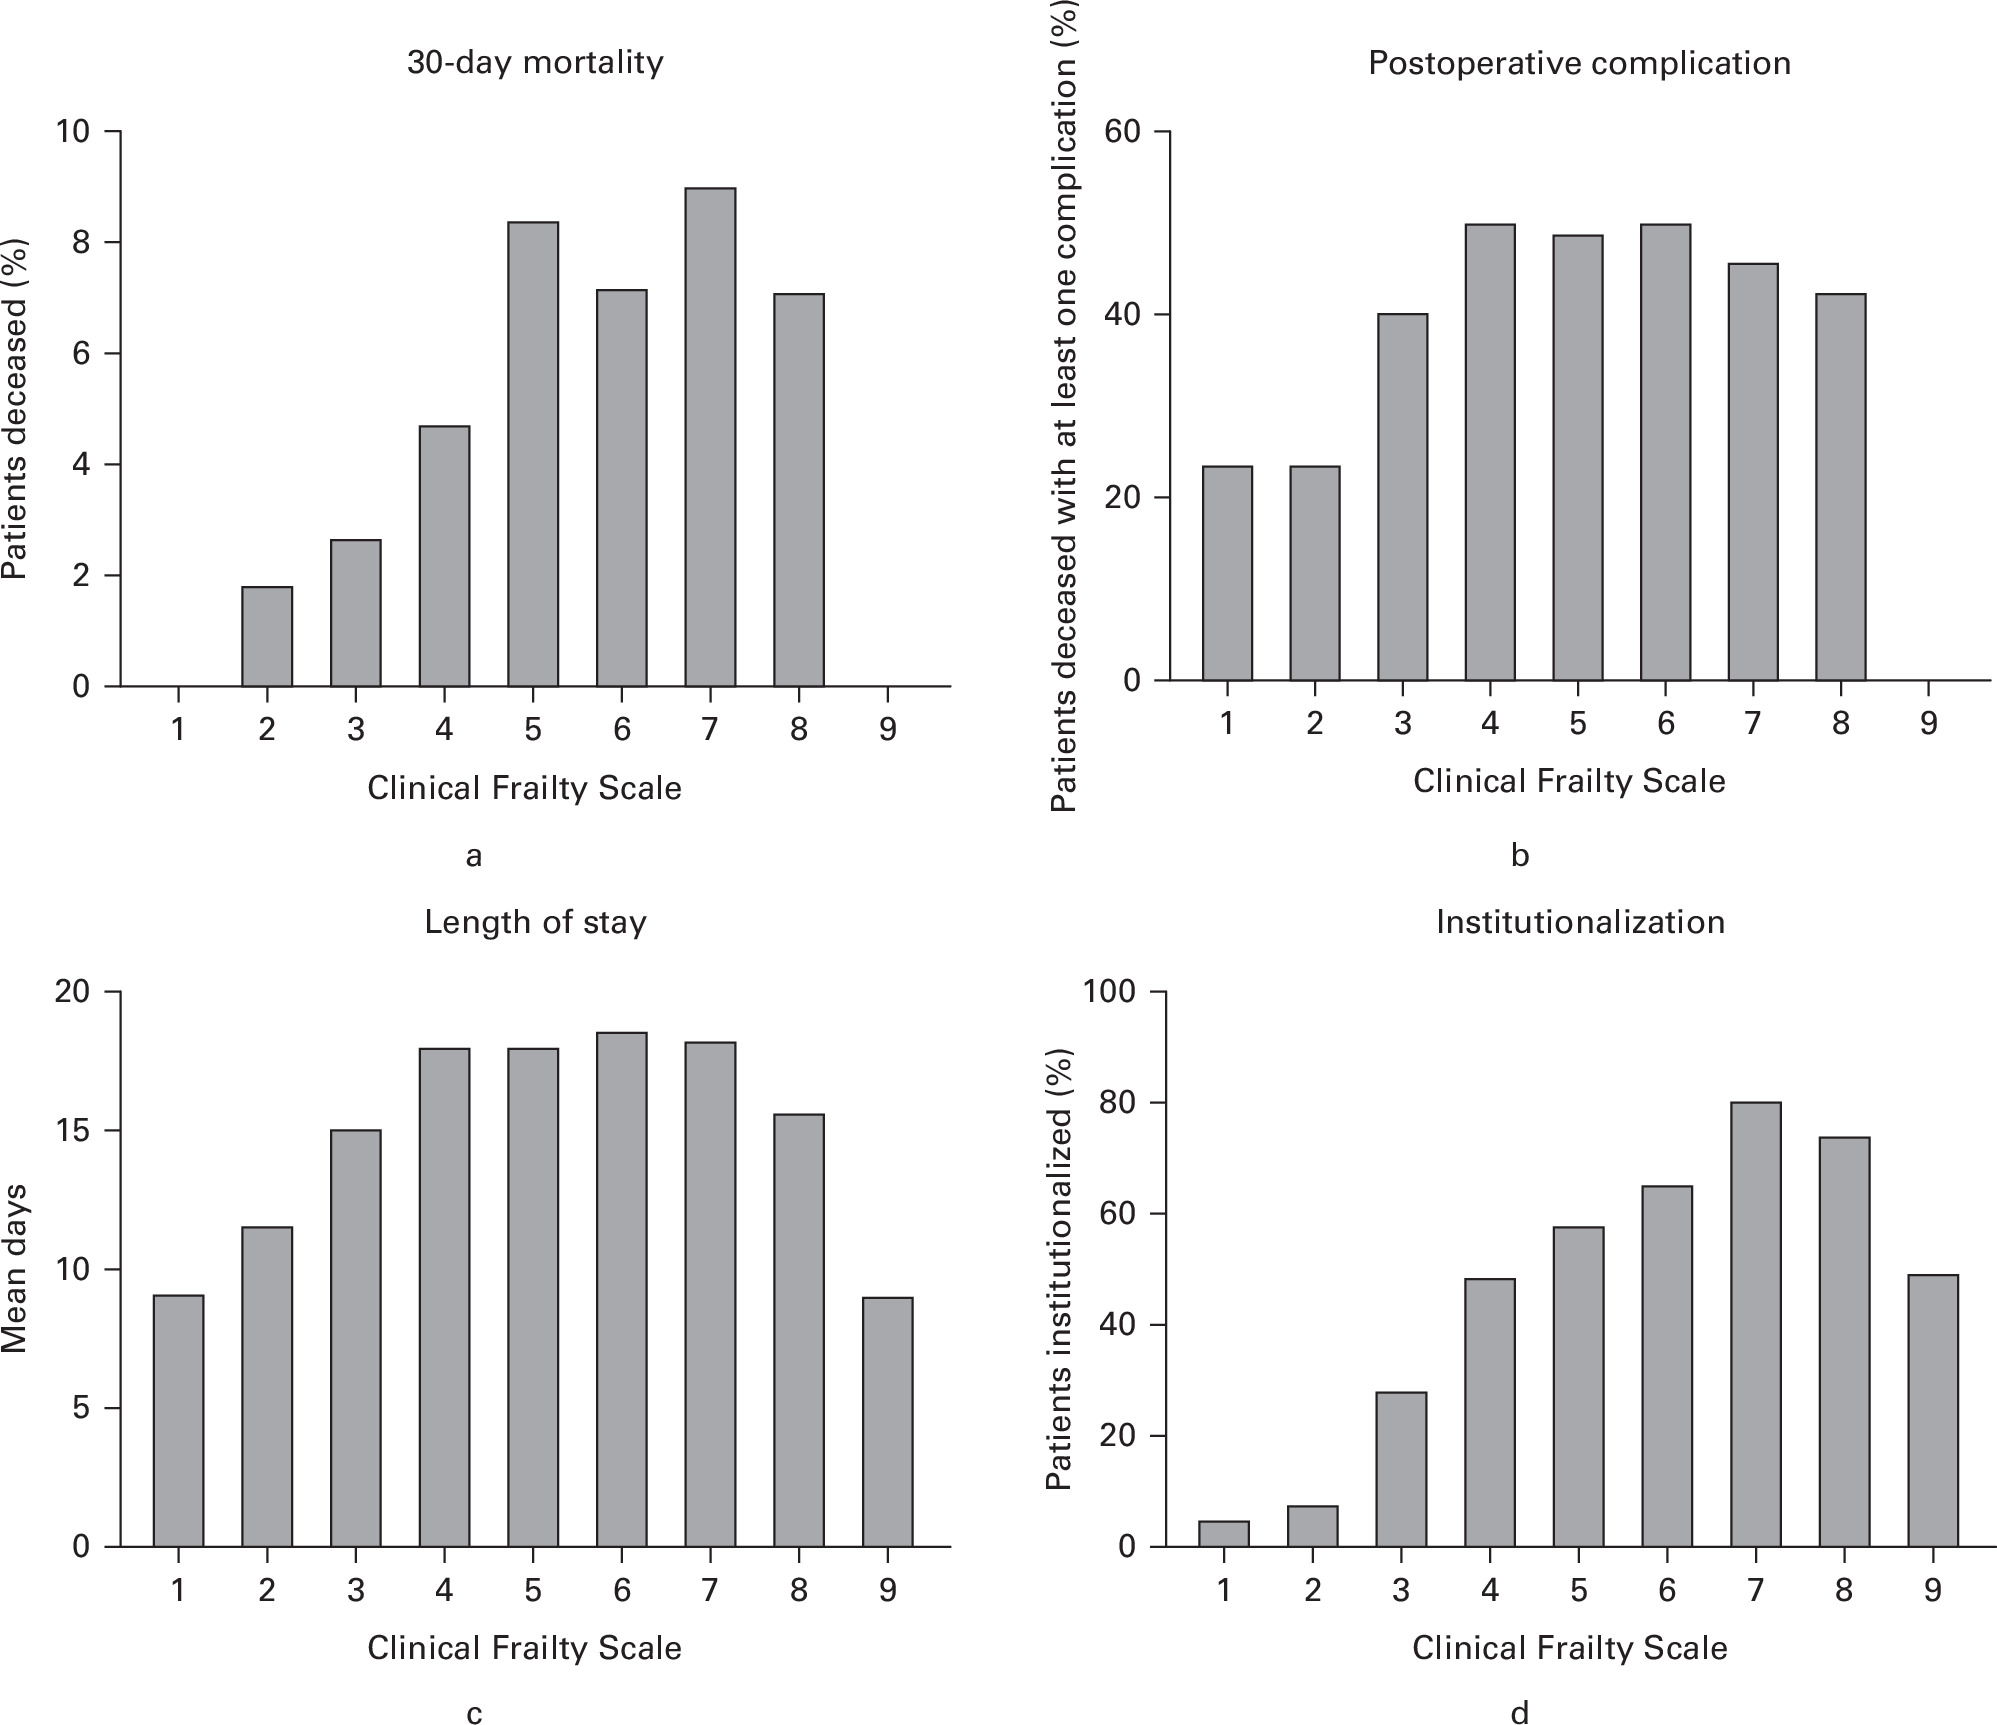 Fig. 1 
          a) Clinical Frailty Scale (CFS) and 30-day mortality outcome. b) CFS and development of at least one postoperative complication. c) CFS and acute inpatient length of stay. d) CFS and new institutionalization.
        